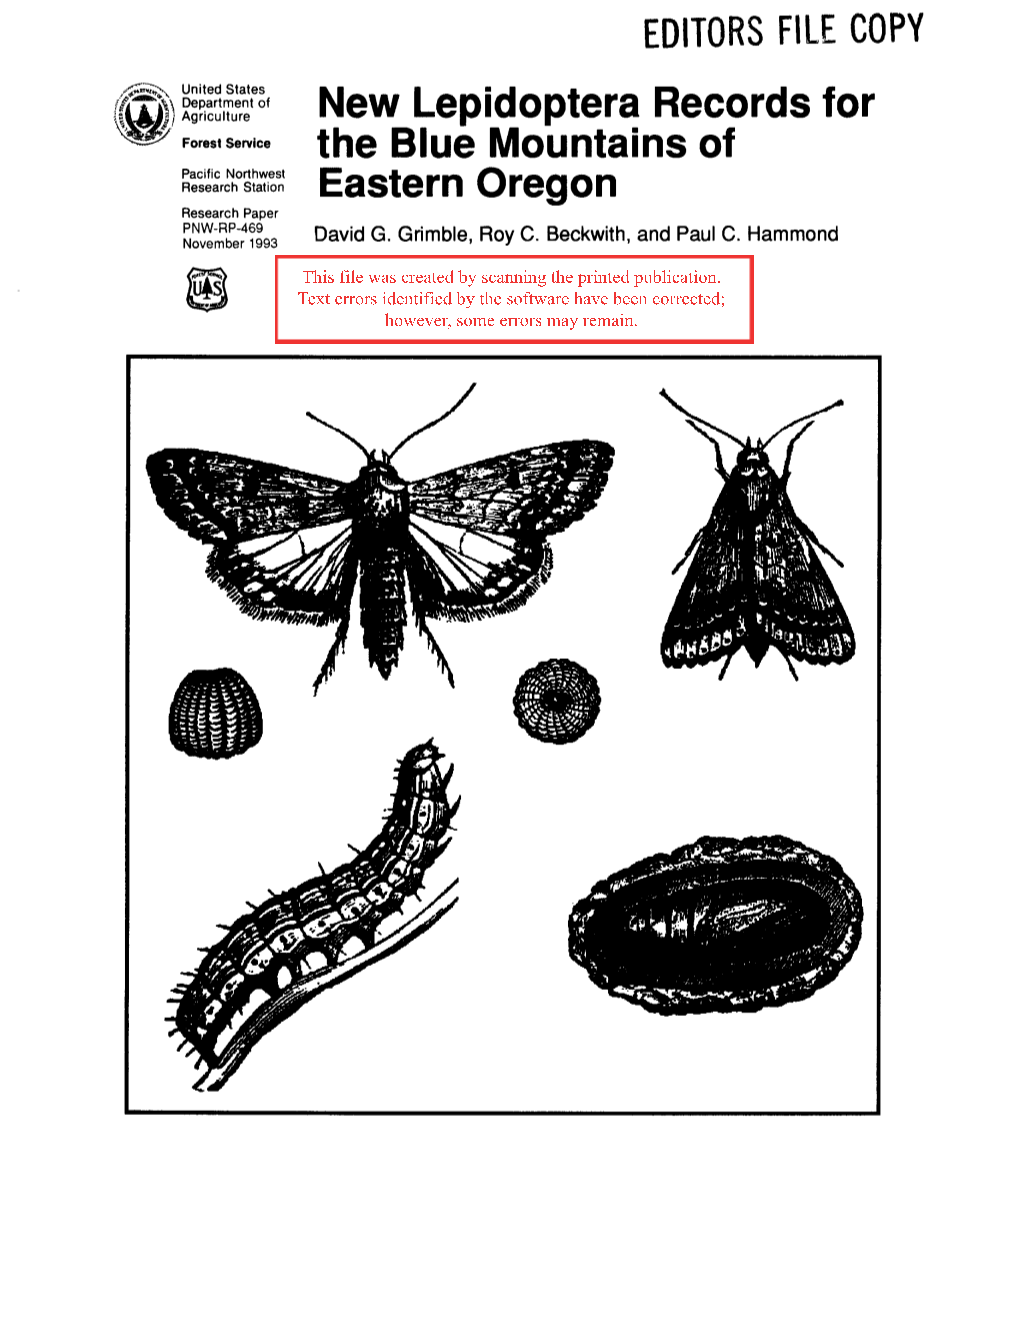 New Lepidoptera Records for the Blue Mountains of Eastern Oregon